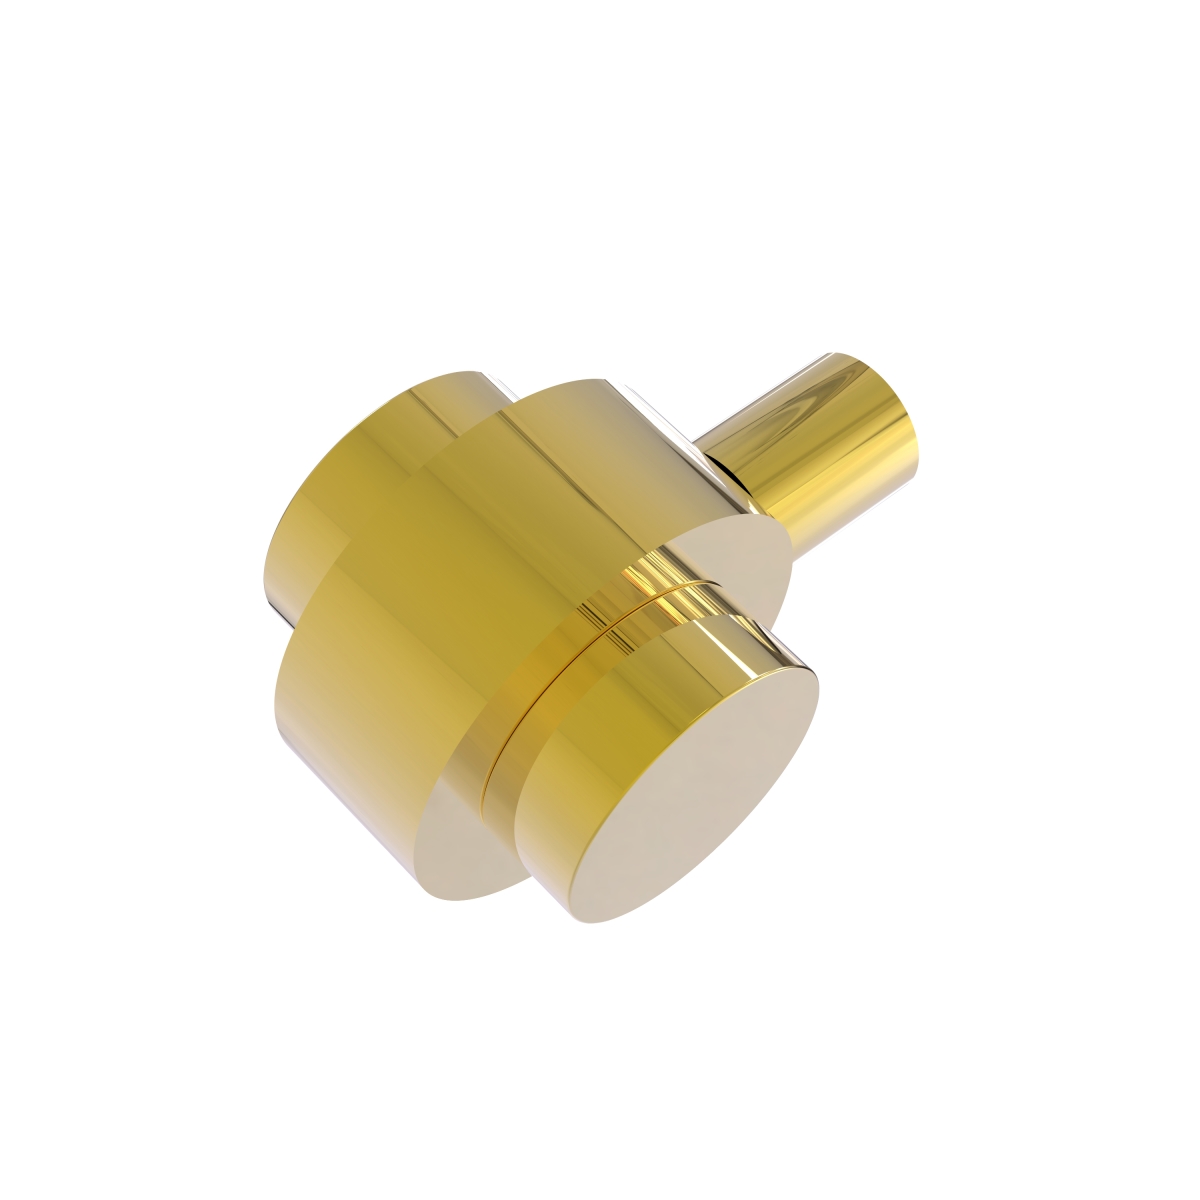 102-unl 1.5 X 1.5 X 1.5 In. Cabinet Knob With Smooth Ring, Unlacquered Brass